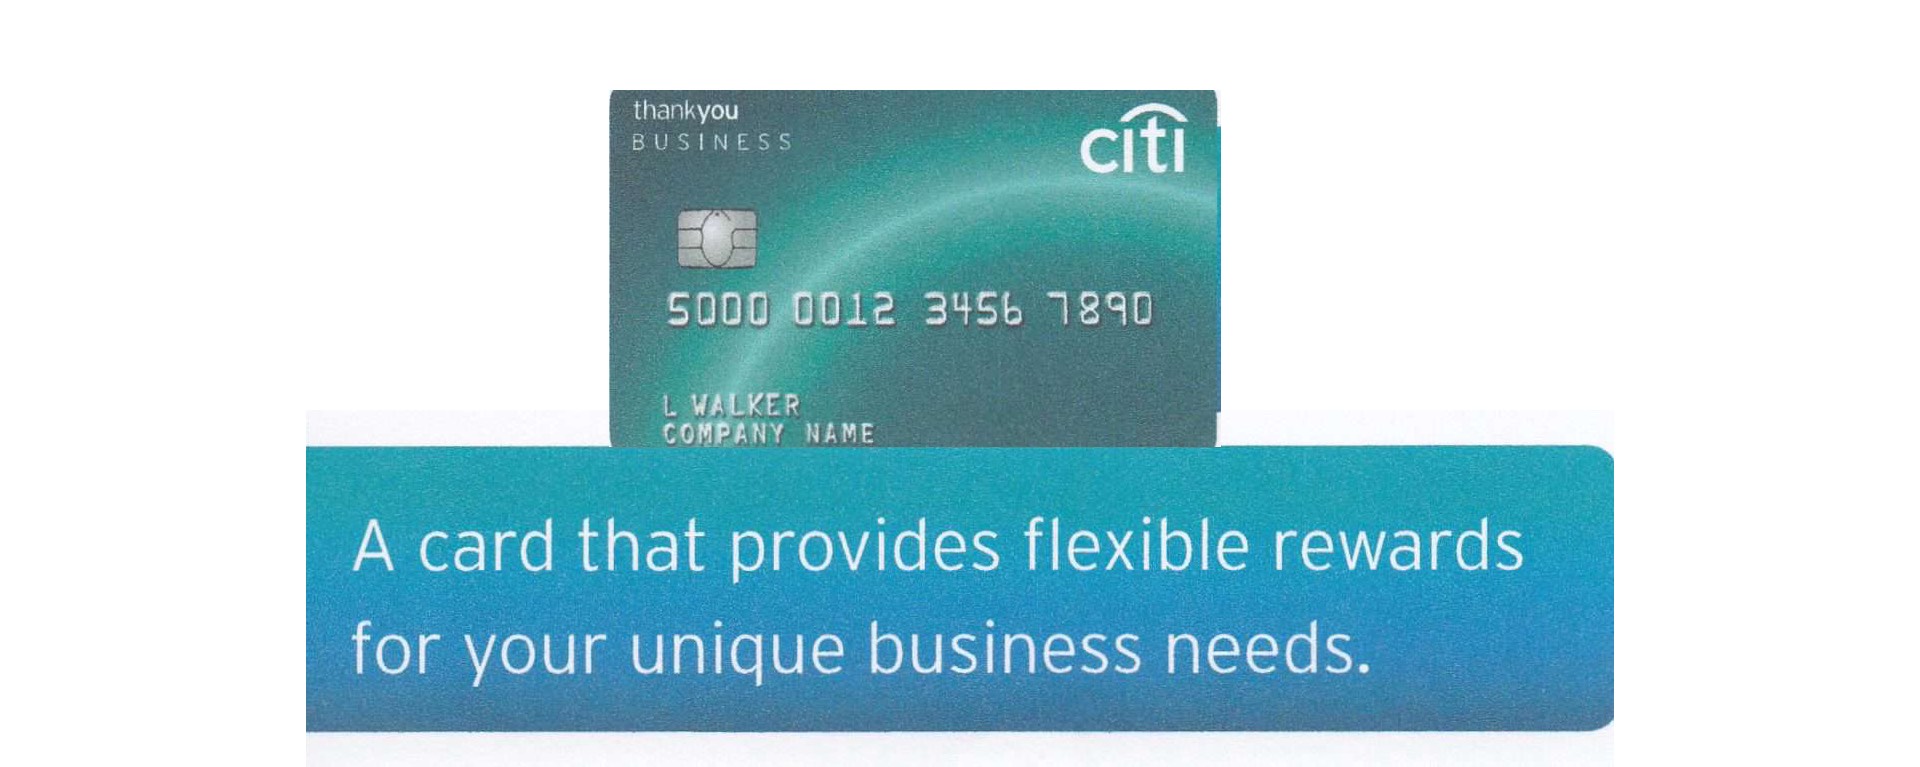 FYI: CitiBusiness ThankYou Cards Unavailable to New Applicants Right Now